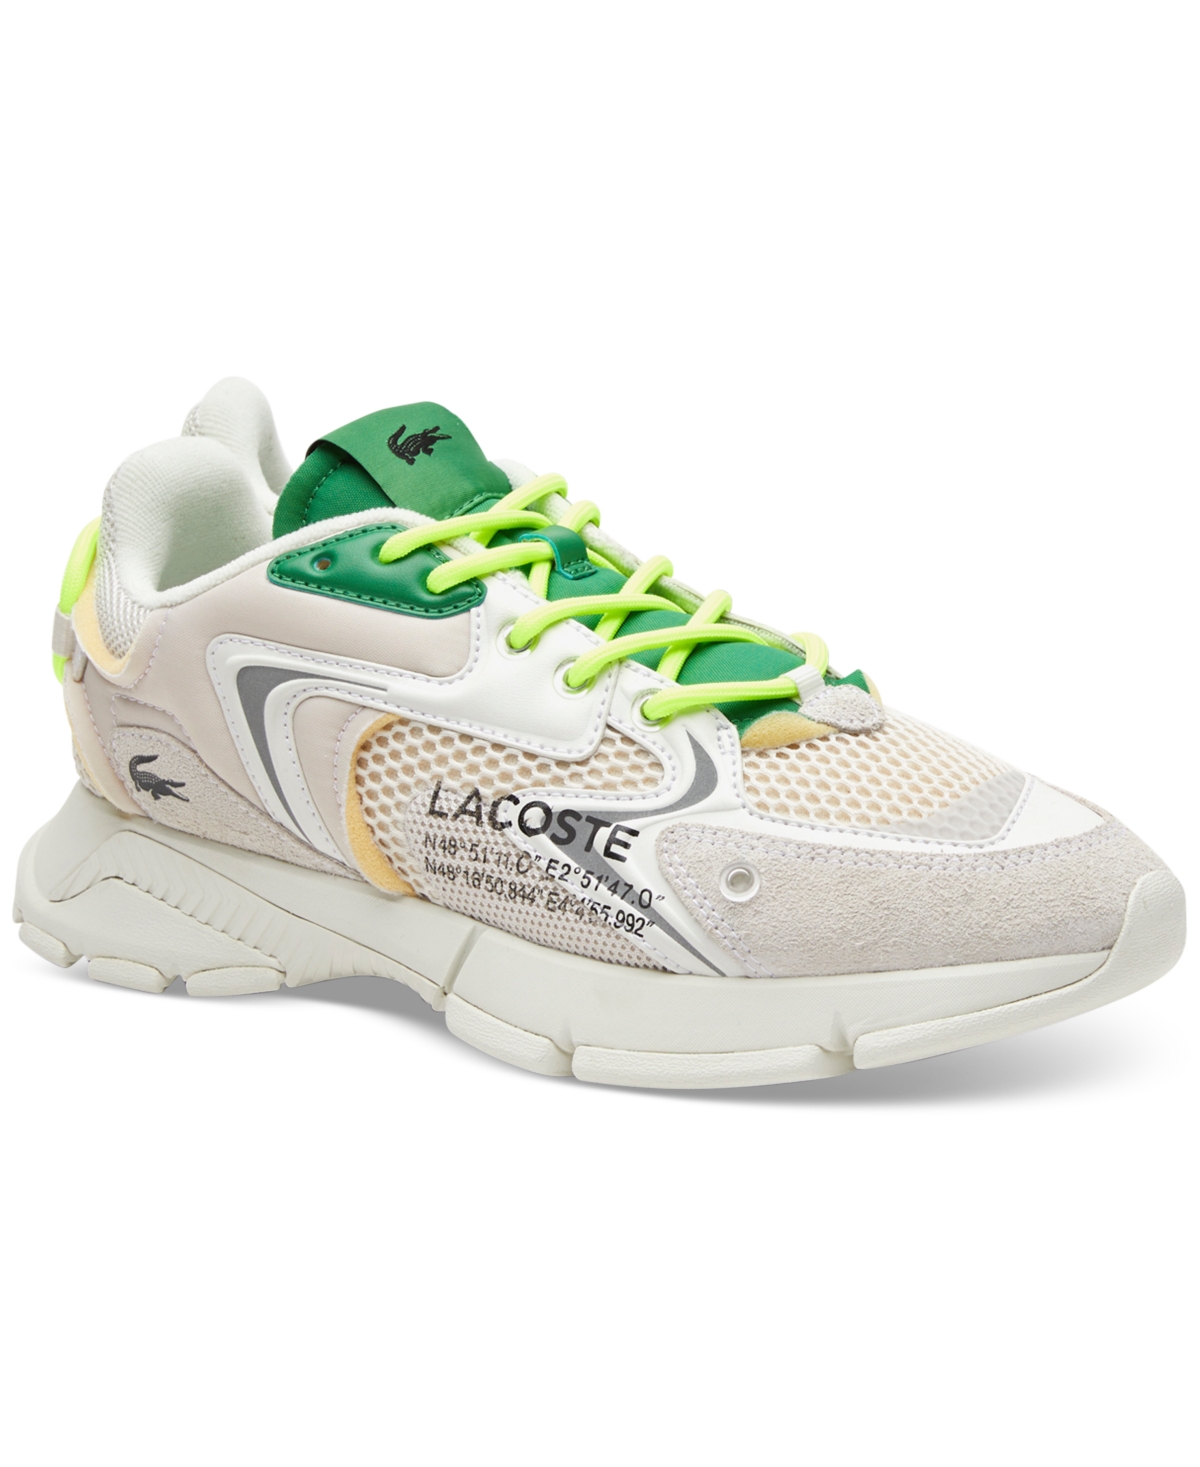 Lacoste L003 Neo Sneakers In Off White And Green